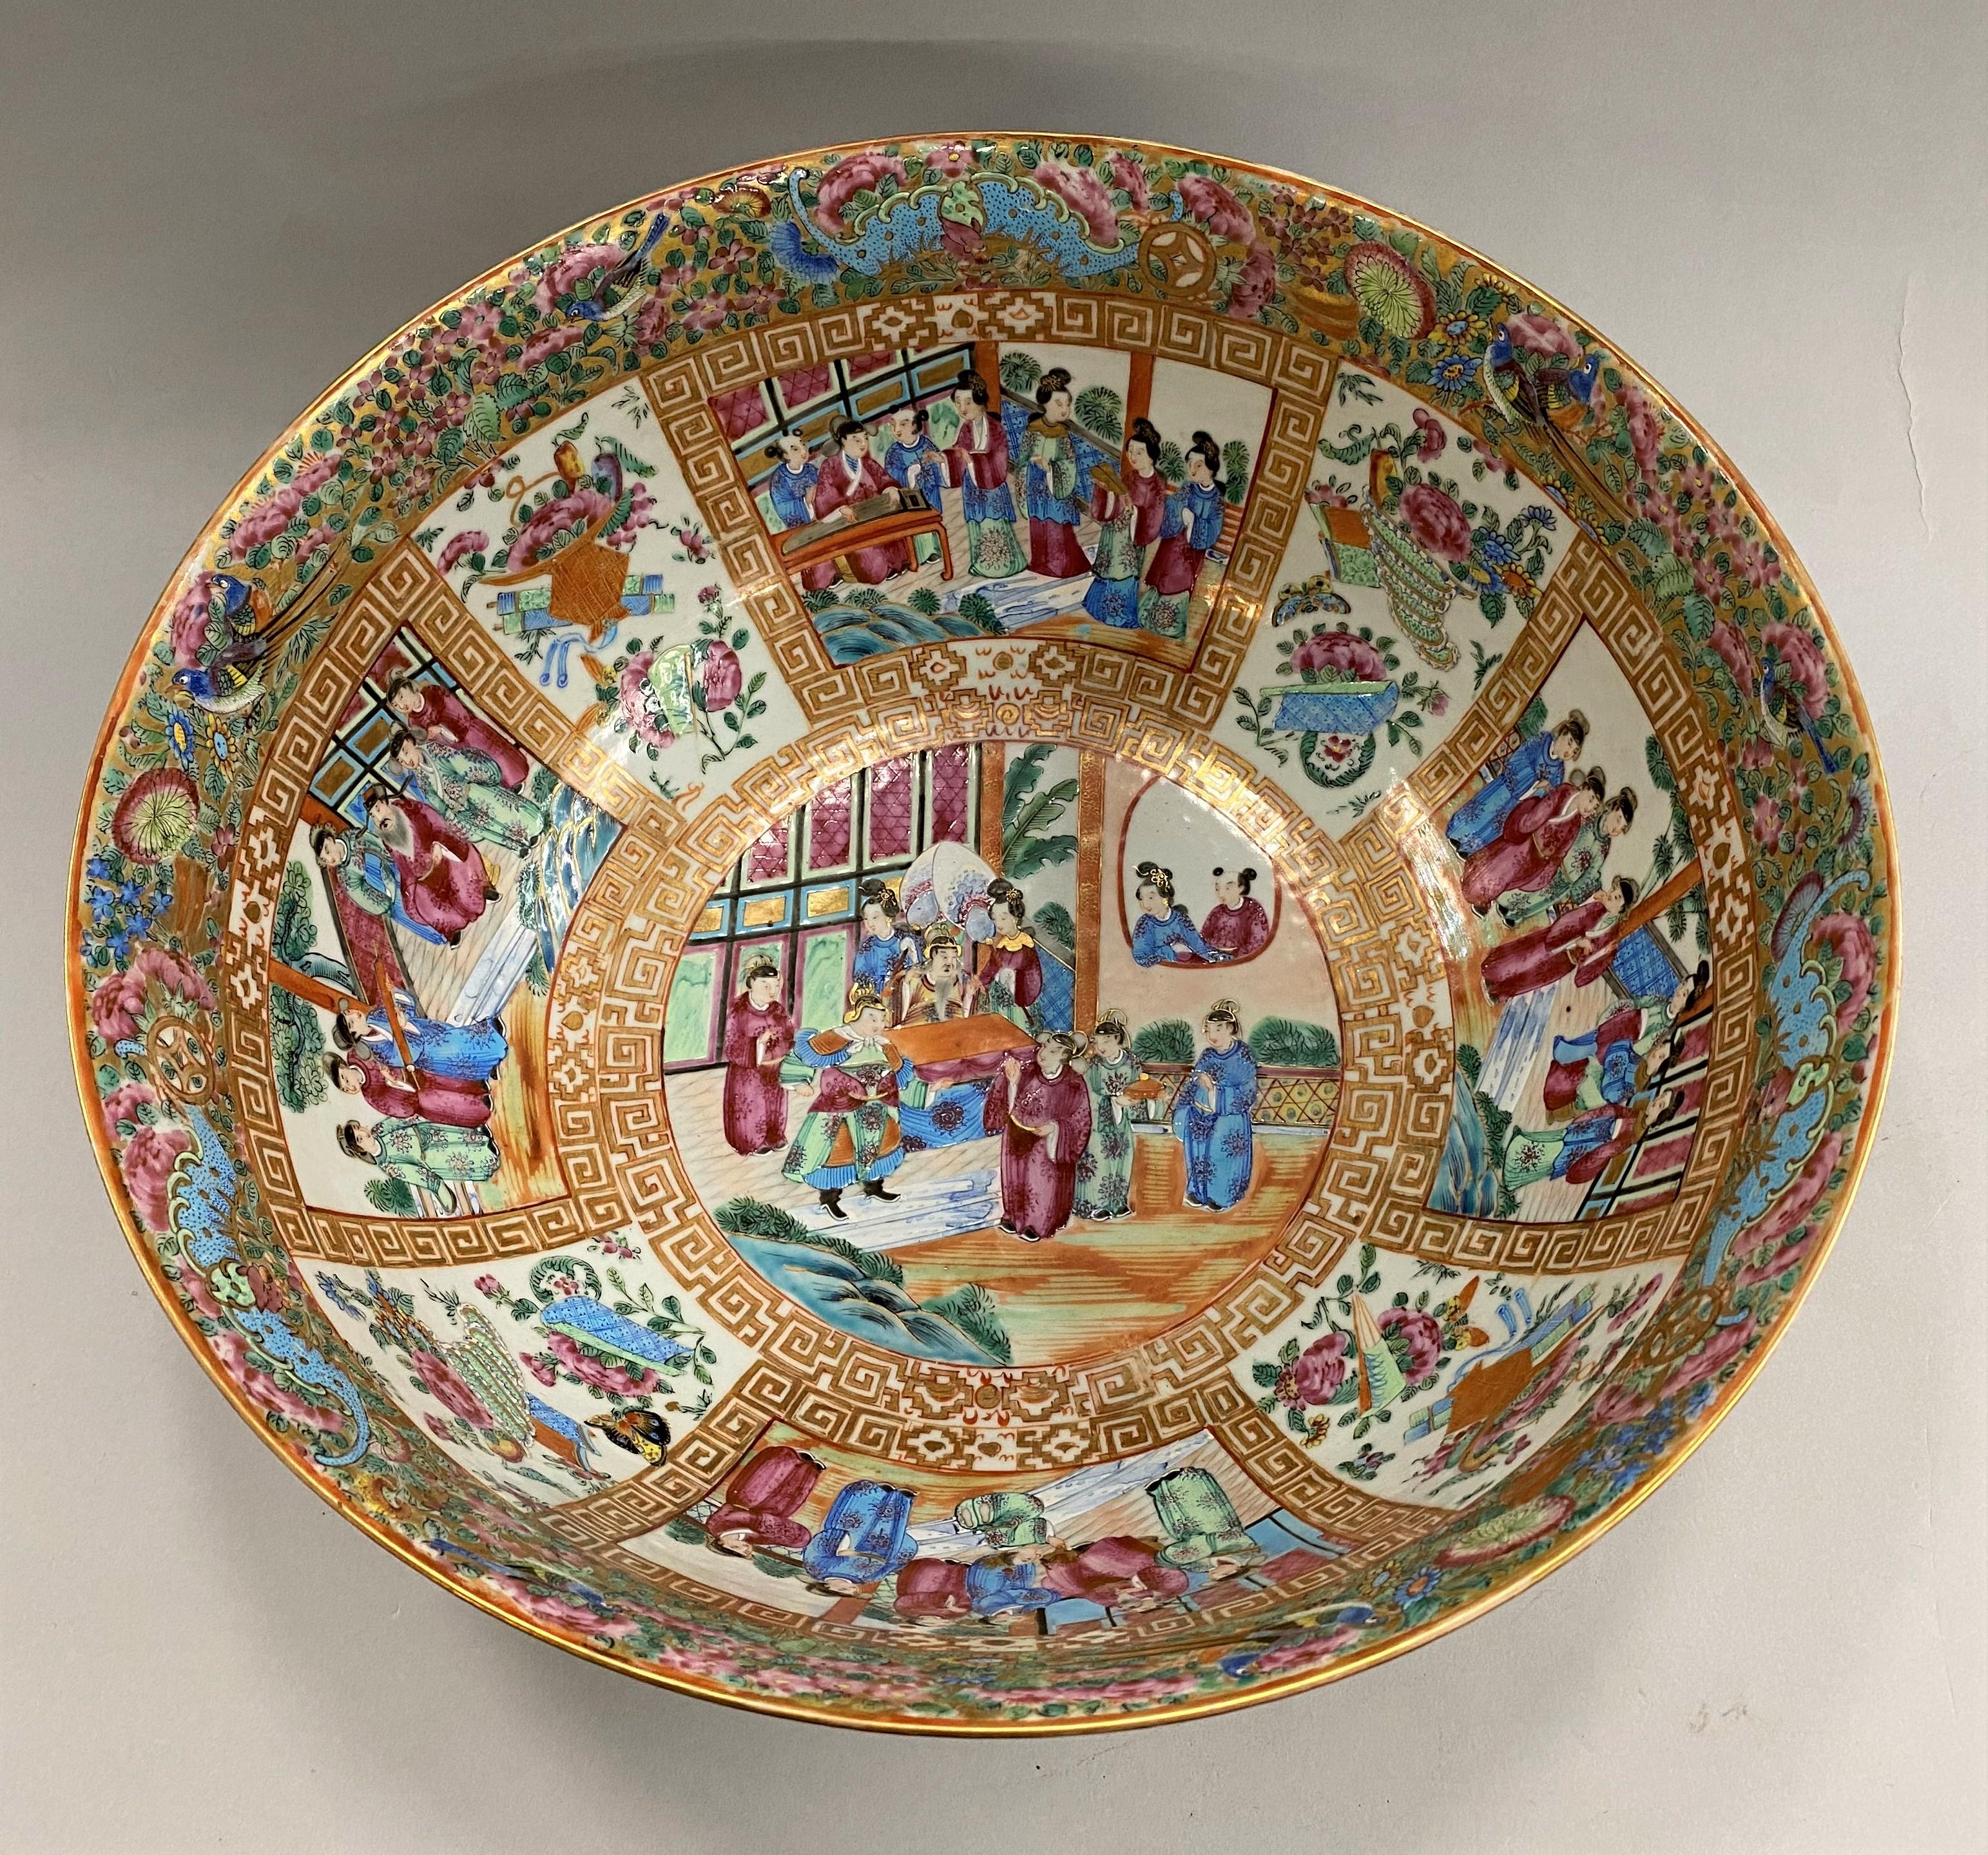 An exceptional Chinese Export Rose Mandarin punch bowl beautifully decorated depicting a central figural scene surrounded by eight interior panels alternating figural and foliate scenes, accented with a detailed bird and butterfly decorated rim, and